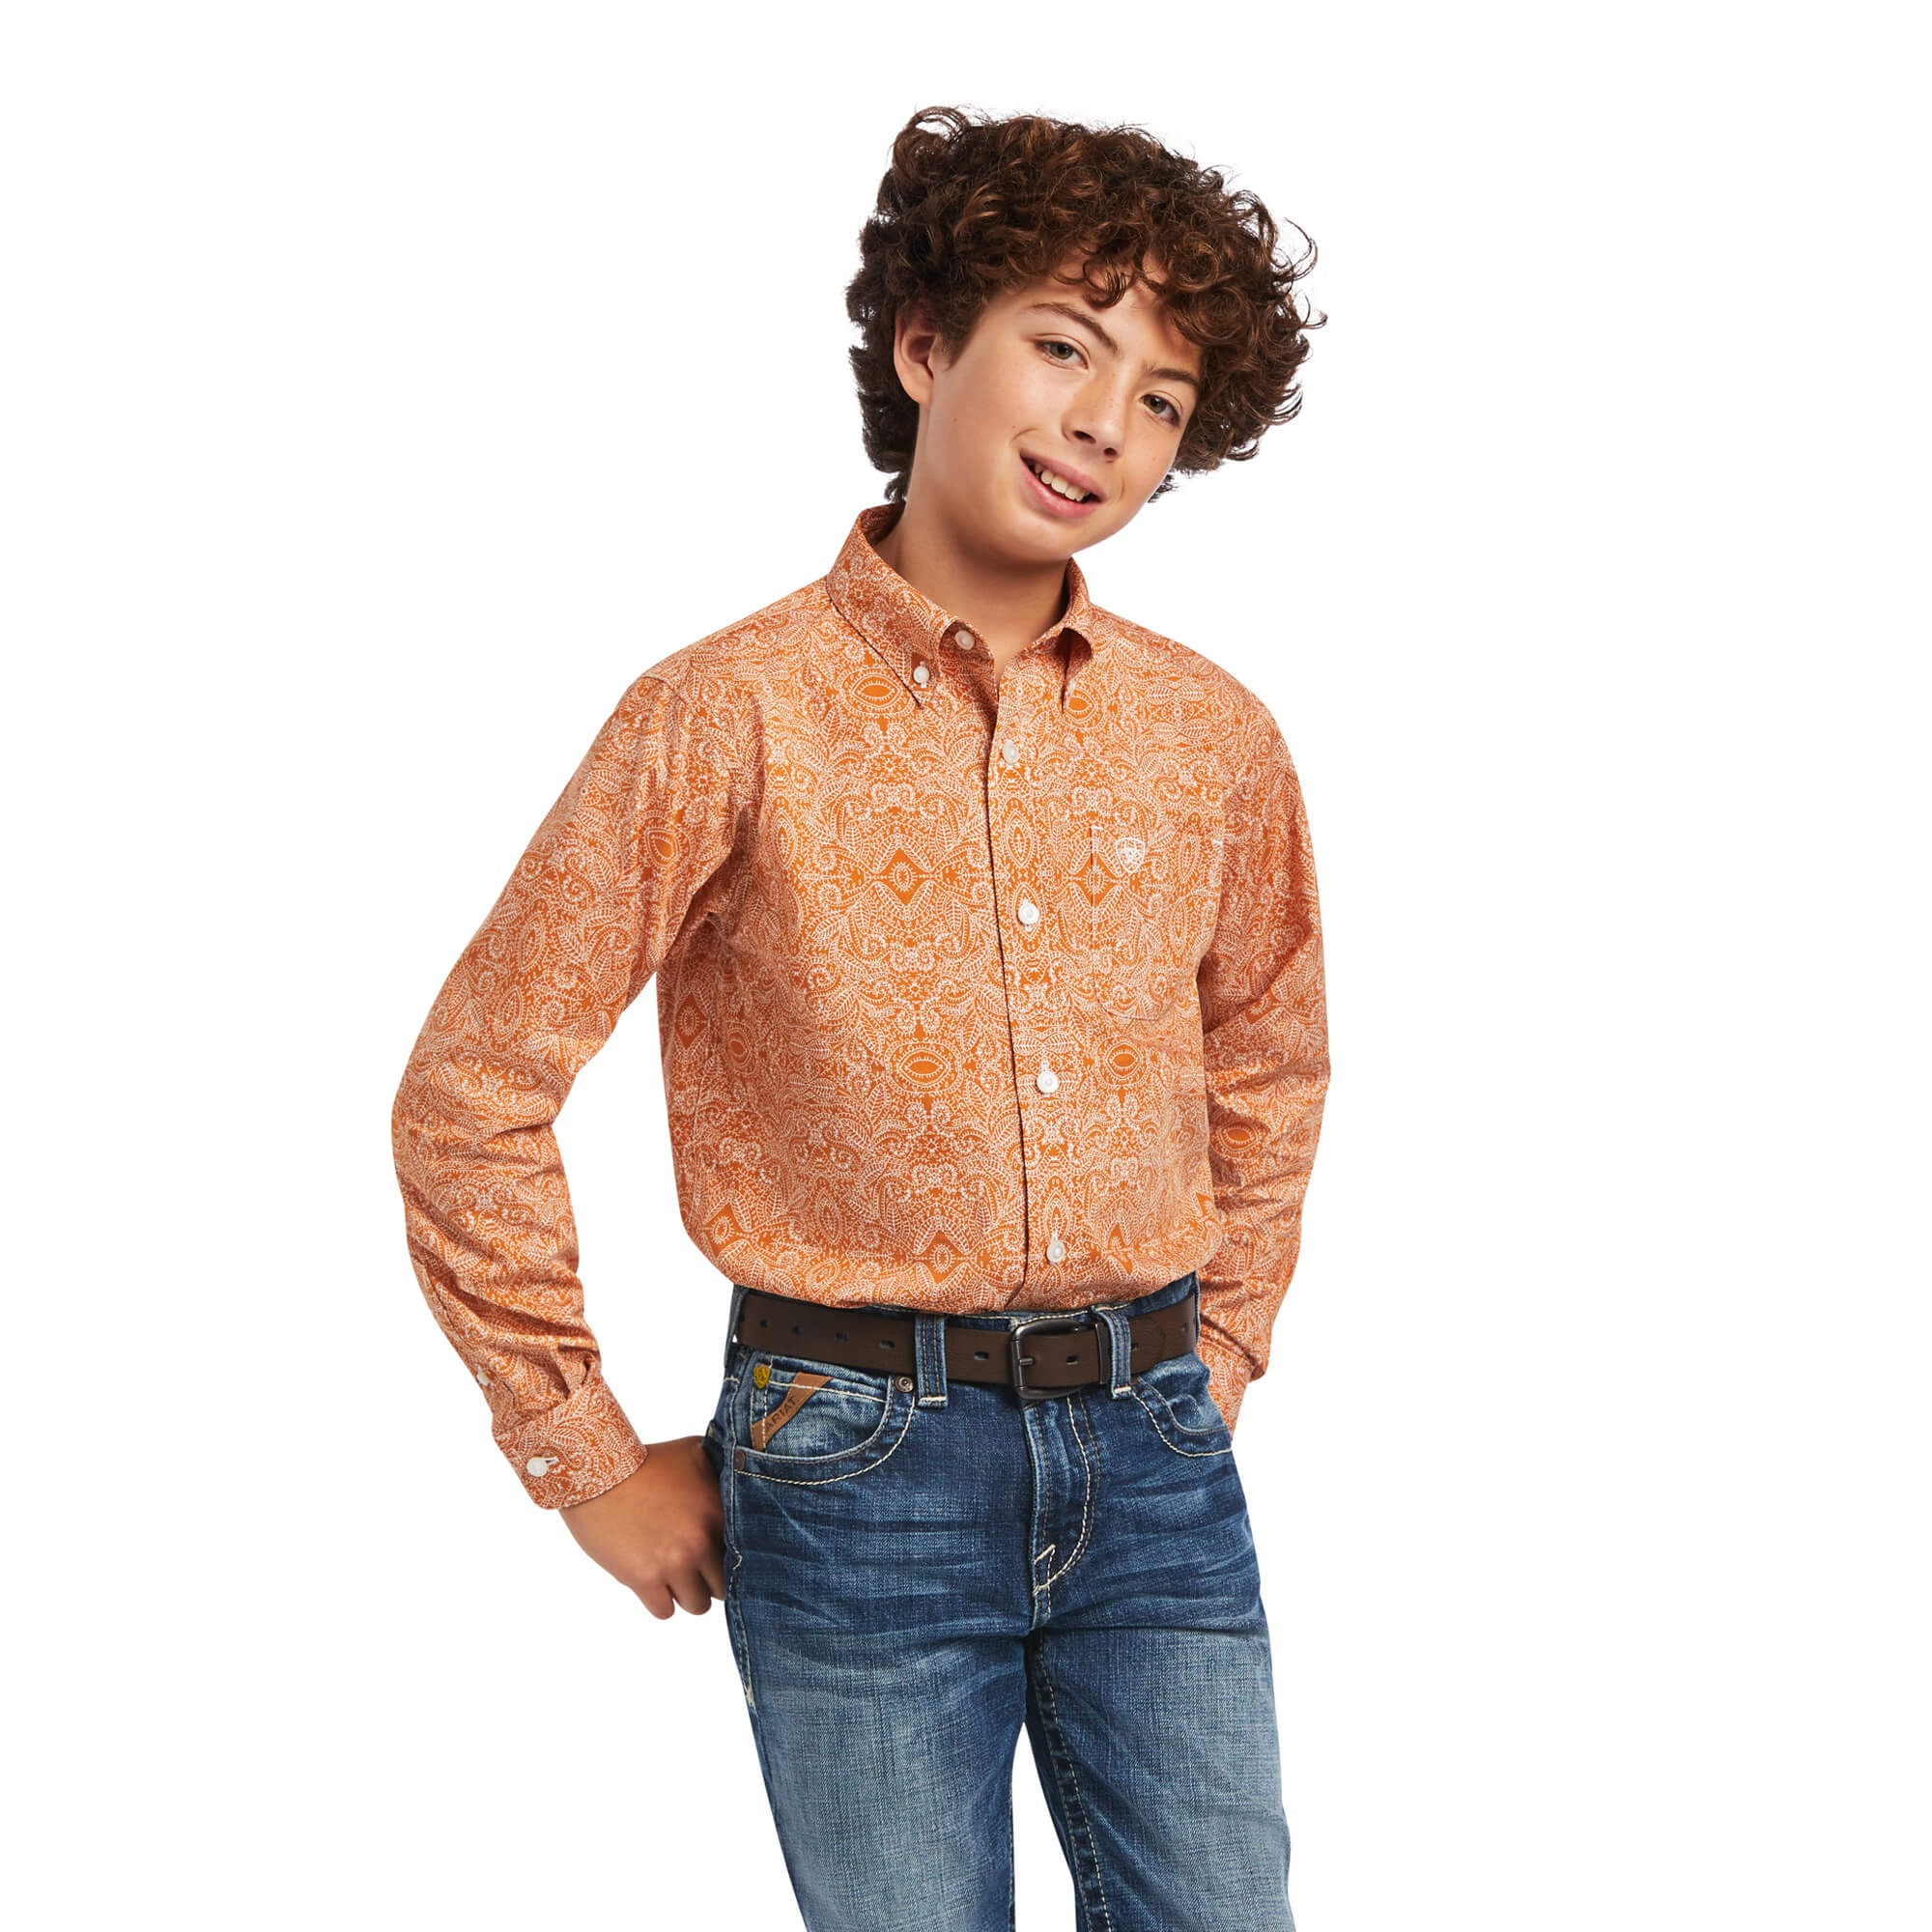 𝐖𝐞𝐬𝐭𝐞𝐫𝐧 𝐊𝐢𝐝𝐬..!!! We have so many great kids clothes in store!  From great brands such as Ariat, Cinch